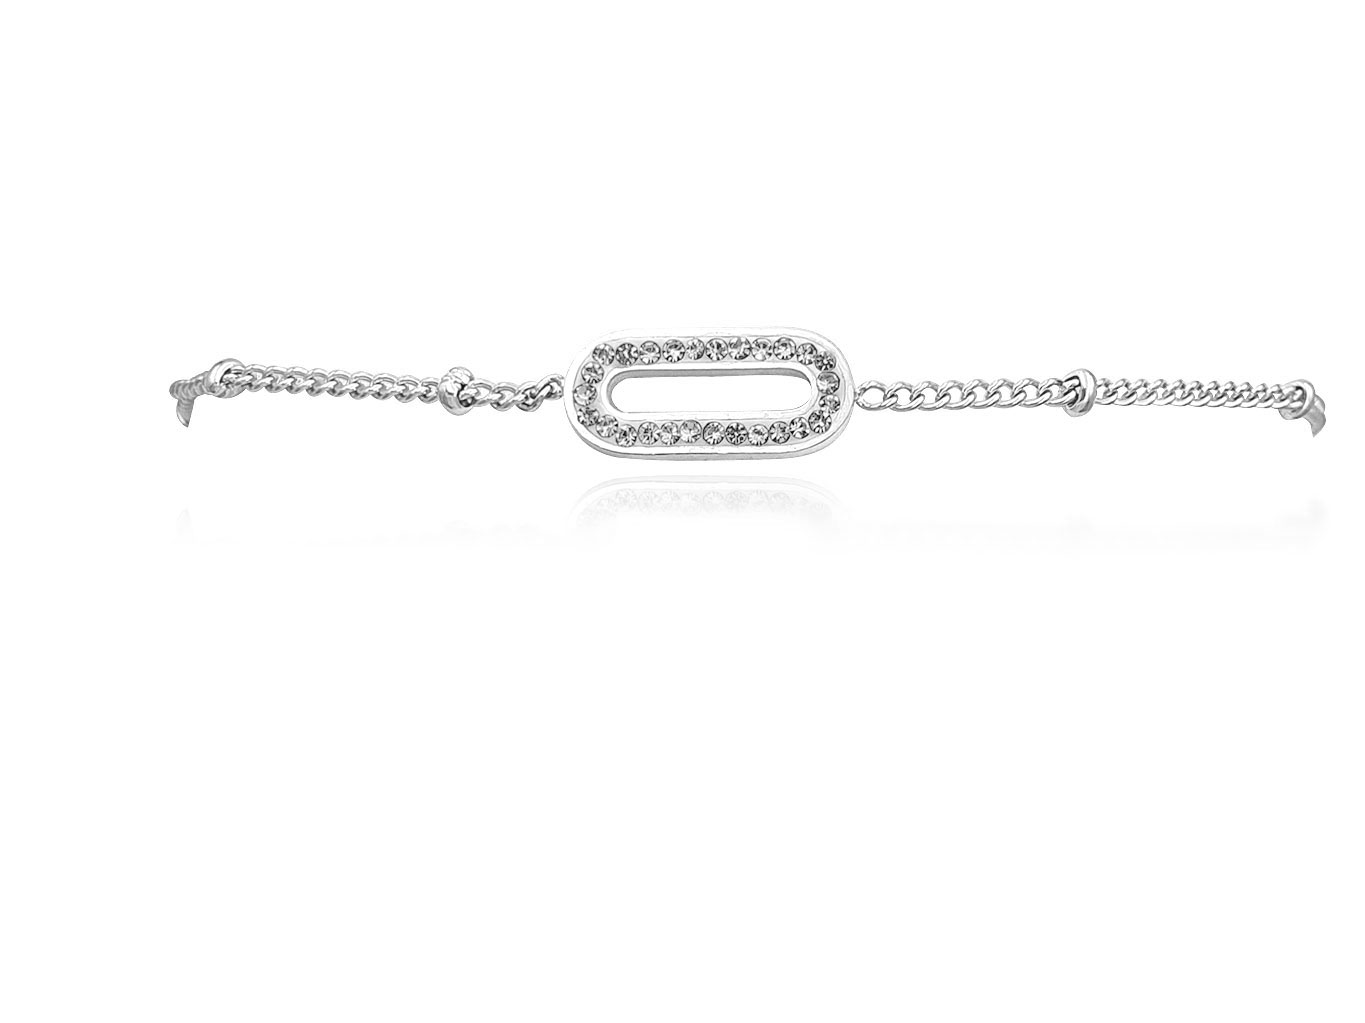 Sparkling Chain Bracelet Silver Plated - Adema